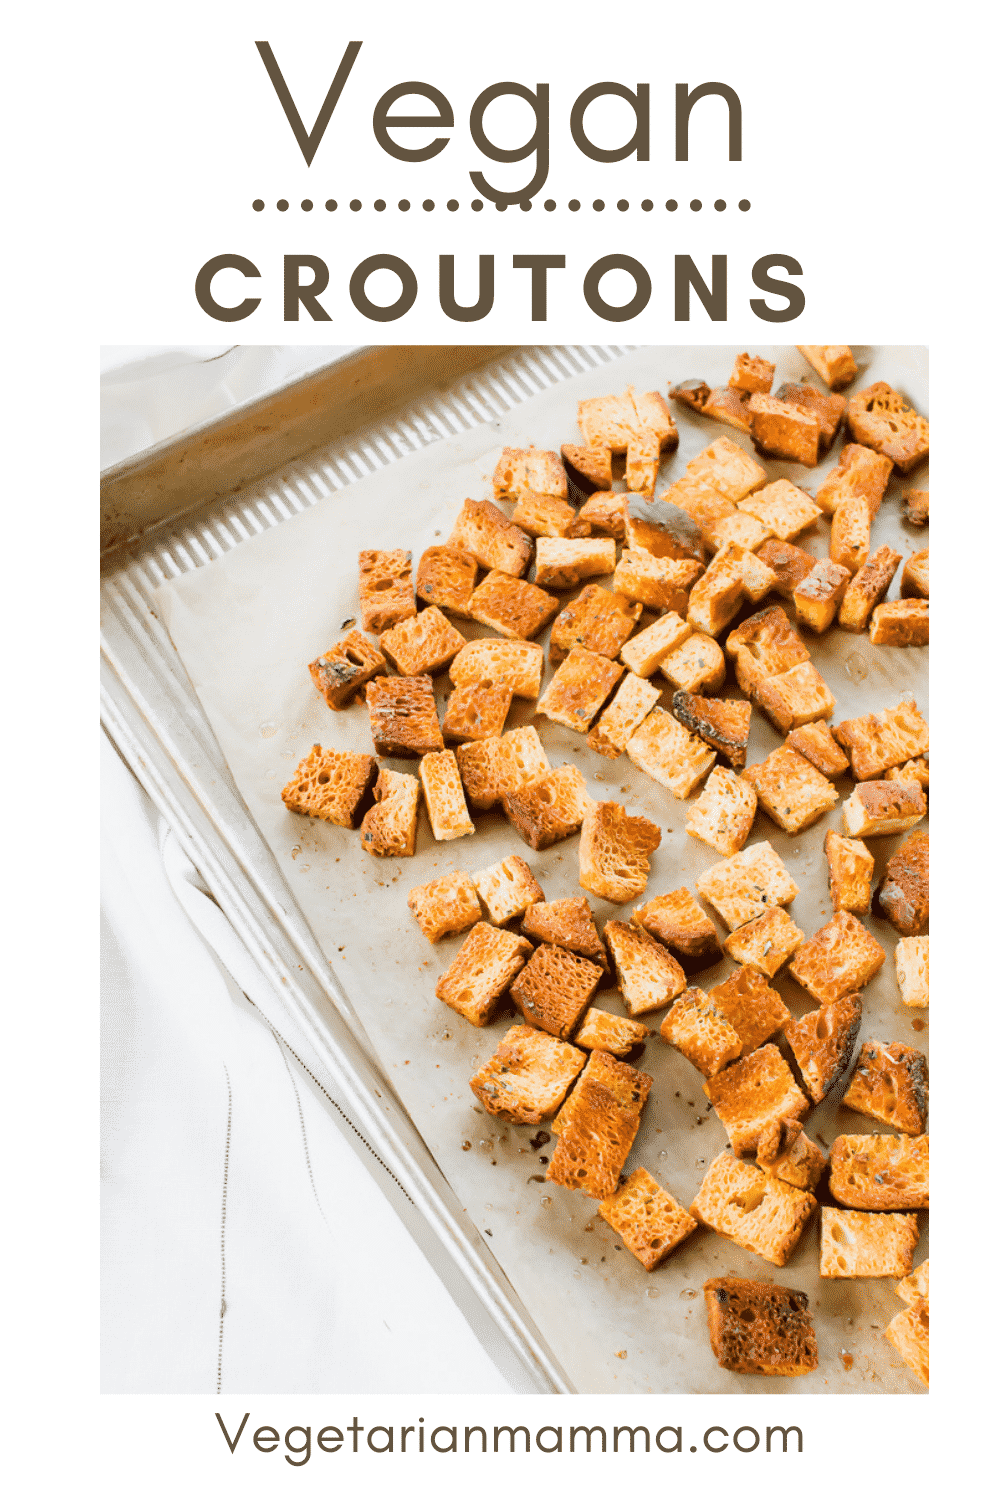 Vegan Croutons are the crunchy piece your favorite soup or salad is missing! You only need 5 pantry staples to whip up these homemade croutons. #vegancroutons #homemadecroutons